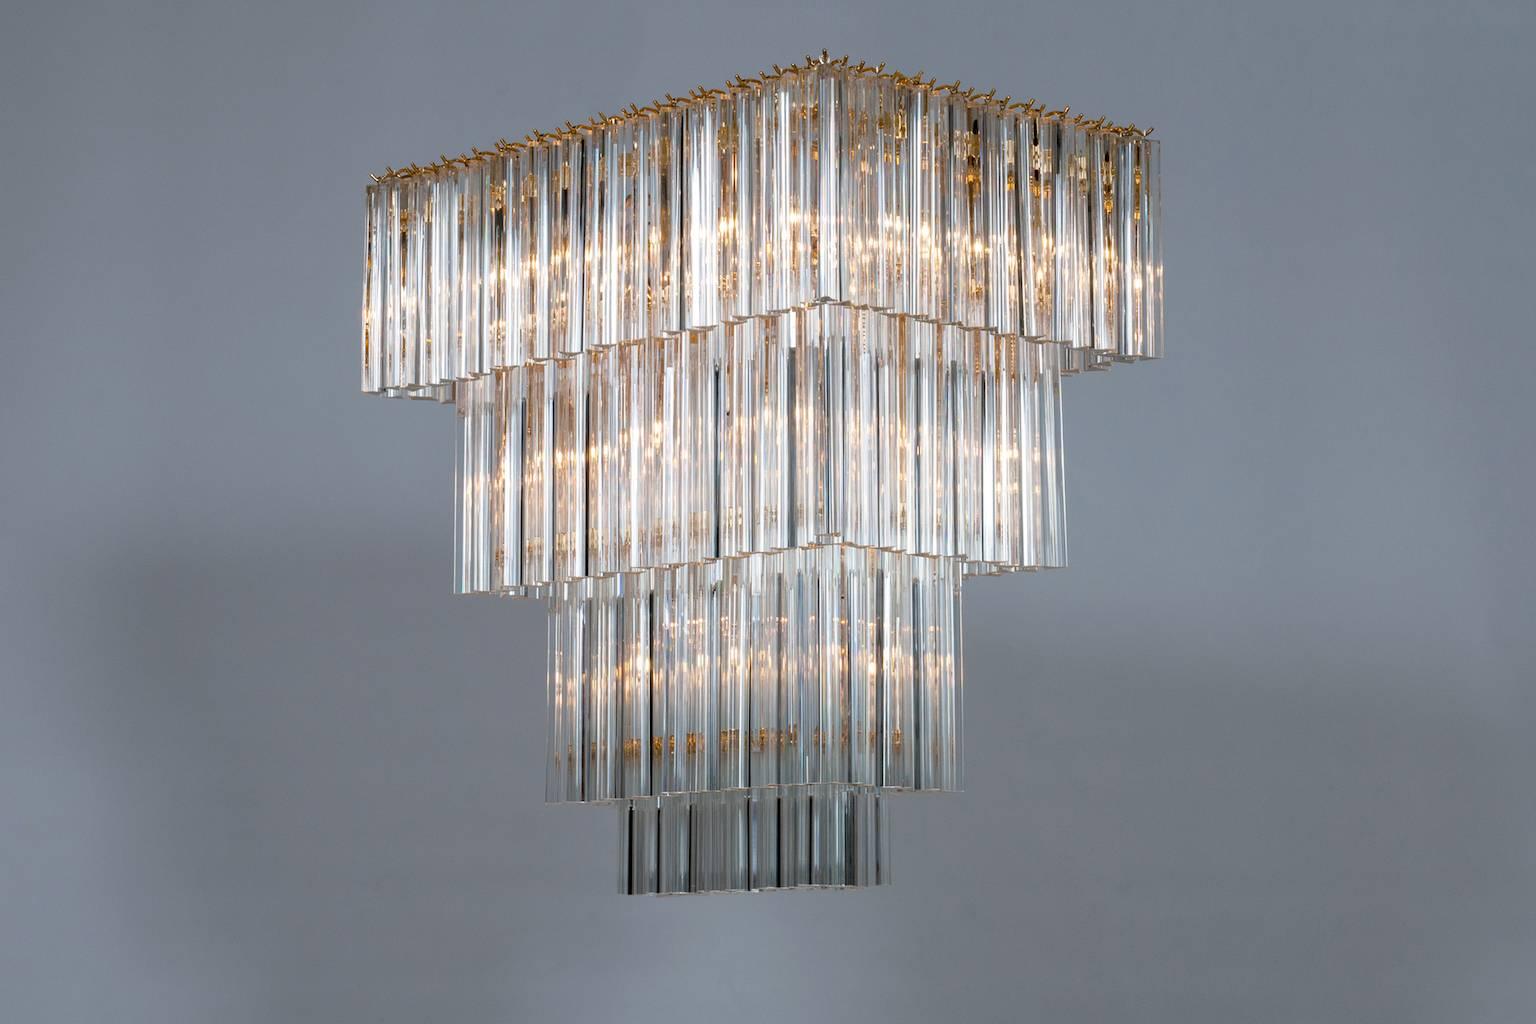 Customizable Rectangular Chandelier in Murano Glass Transparent In New Condition For Sale In Villaverla, IT